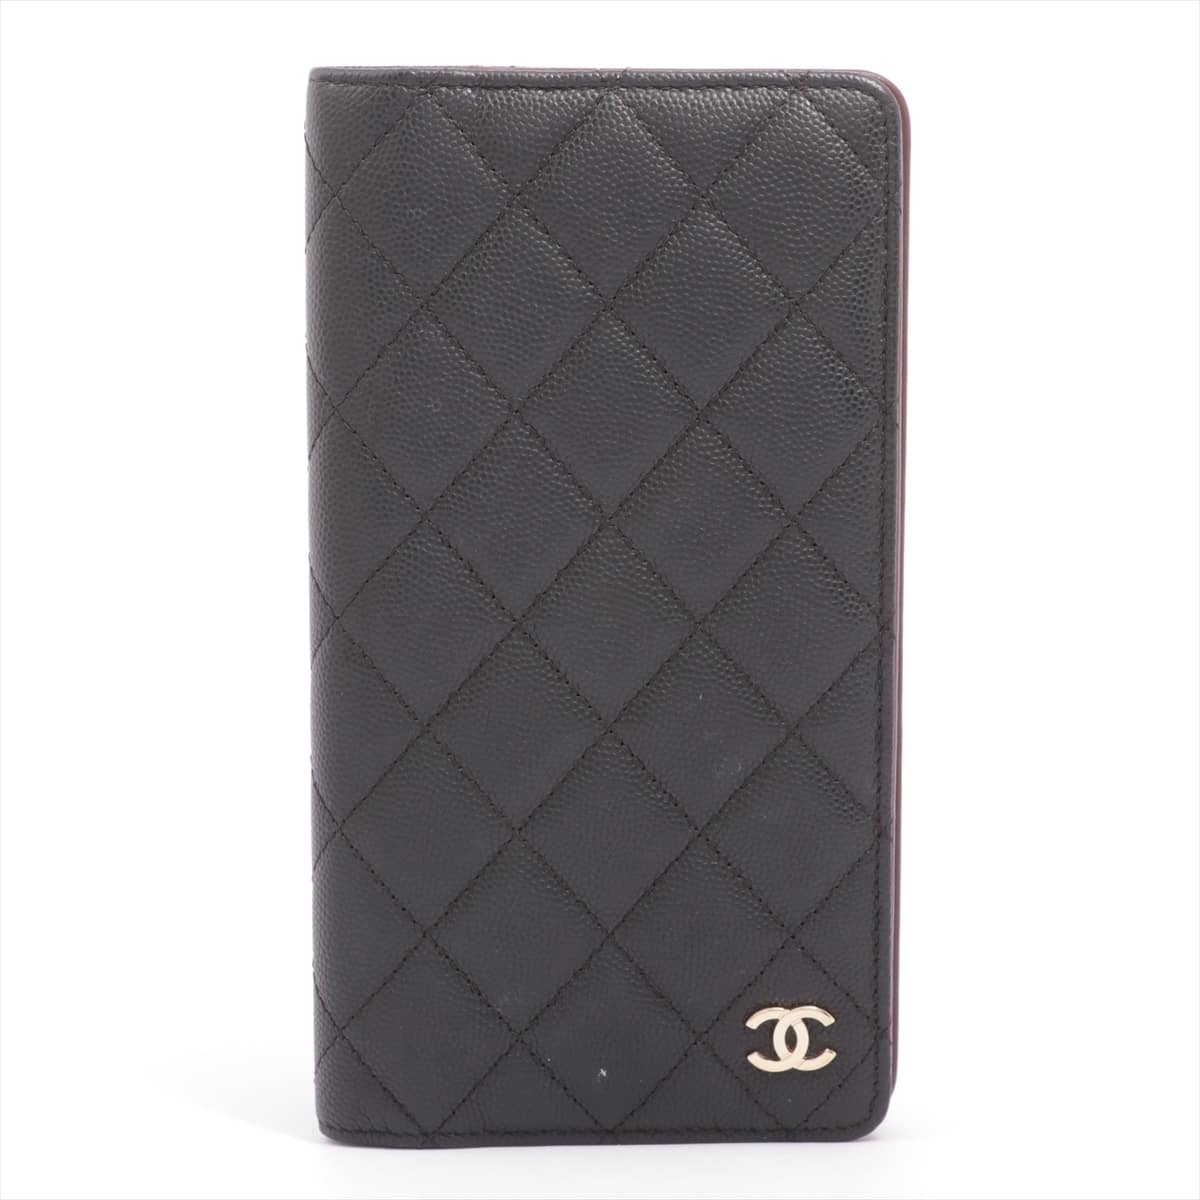 Chanel Matelasse Caviarskin Notebook cover Black Gold Metal fittings 28th